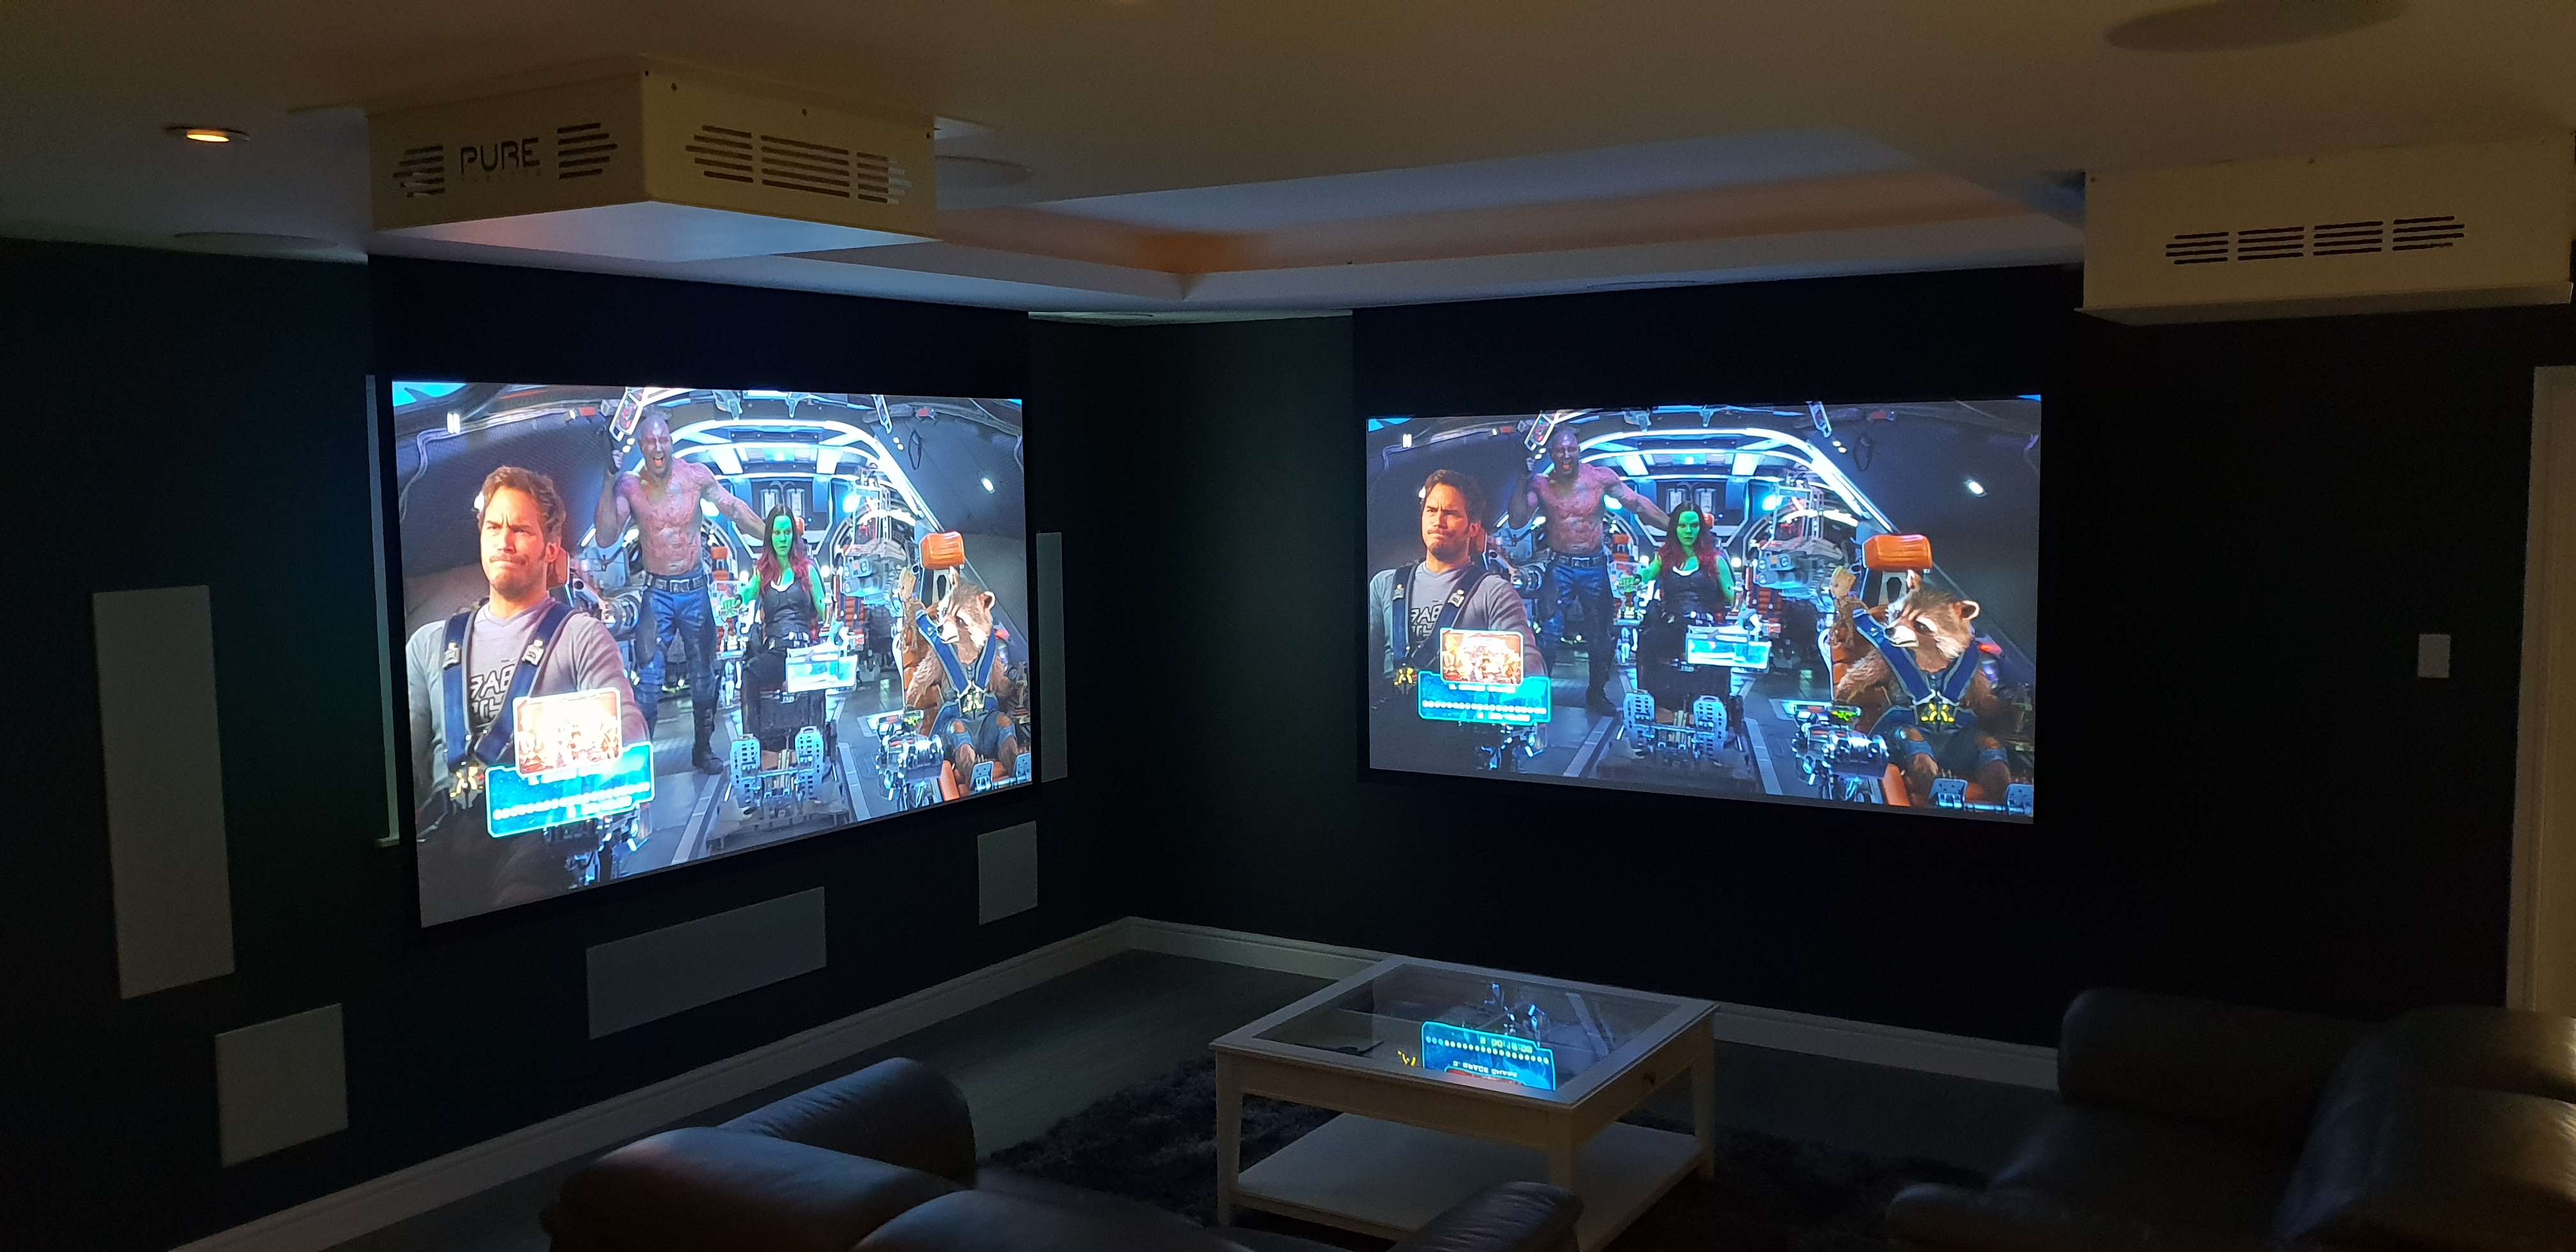 Home Cinema Demo room with Epson EH TW 9400 Projector